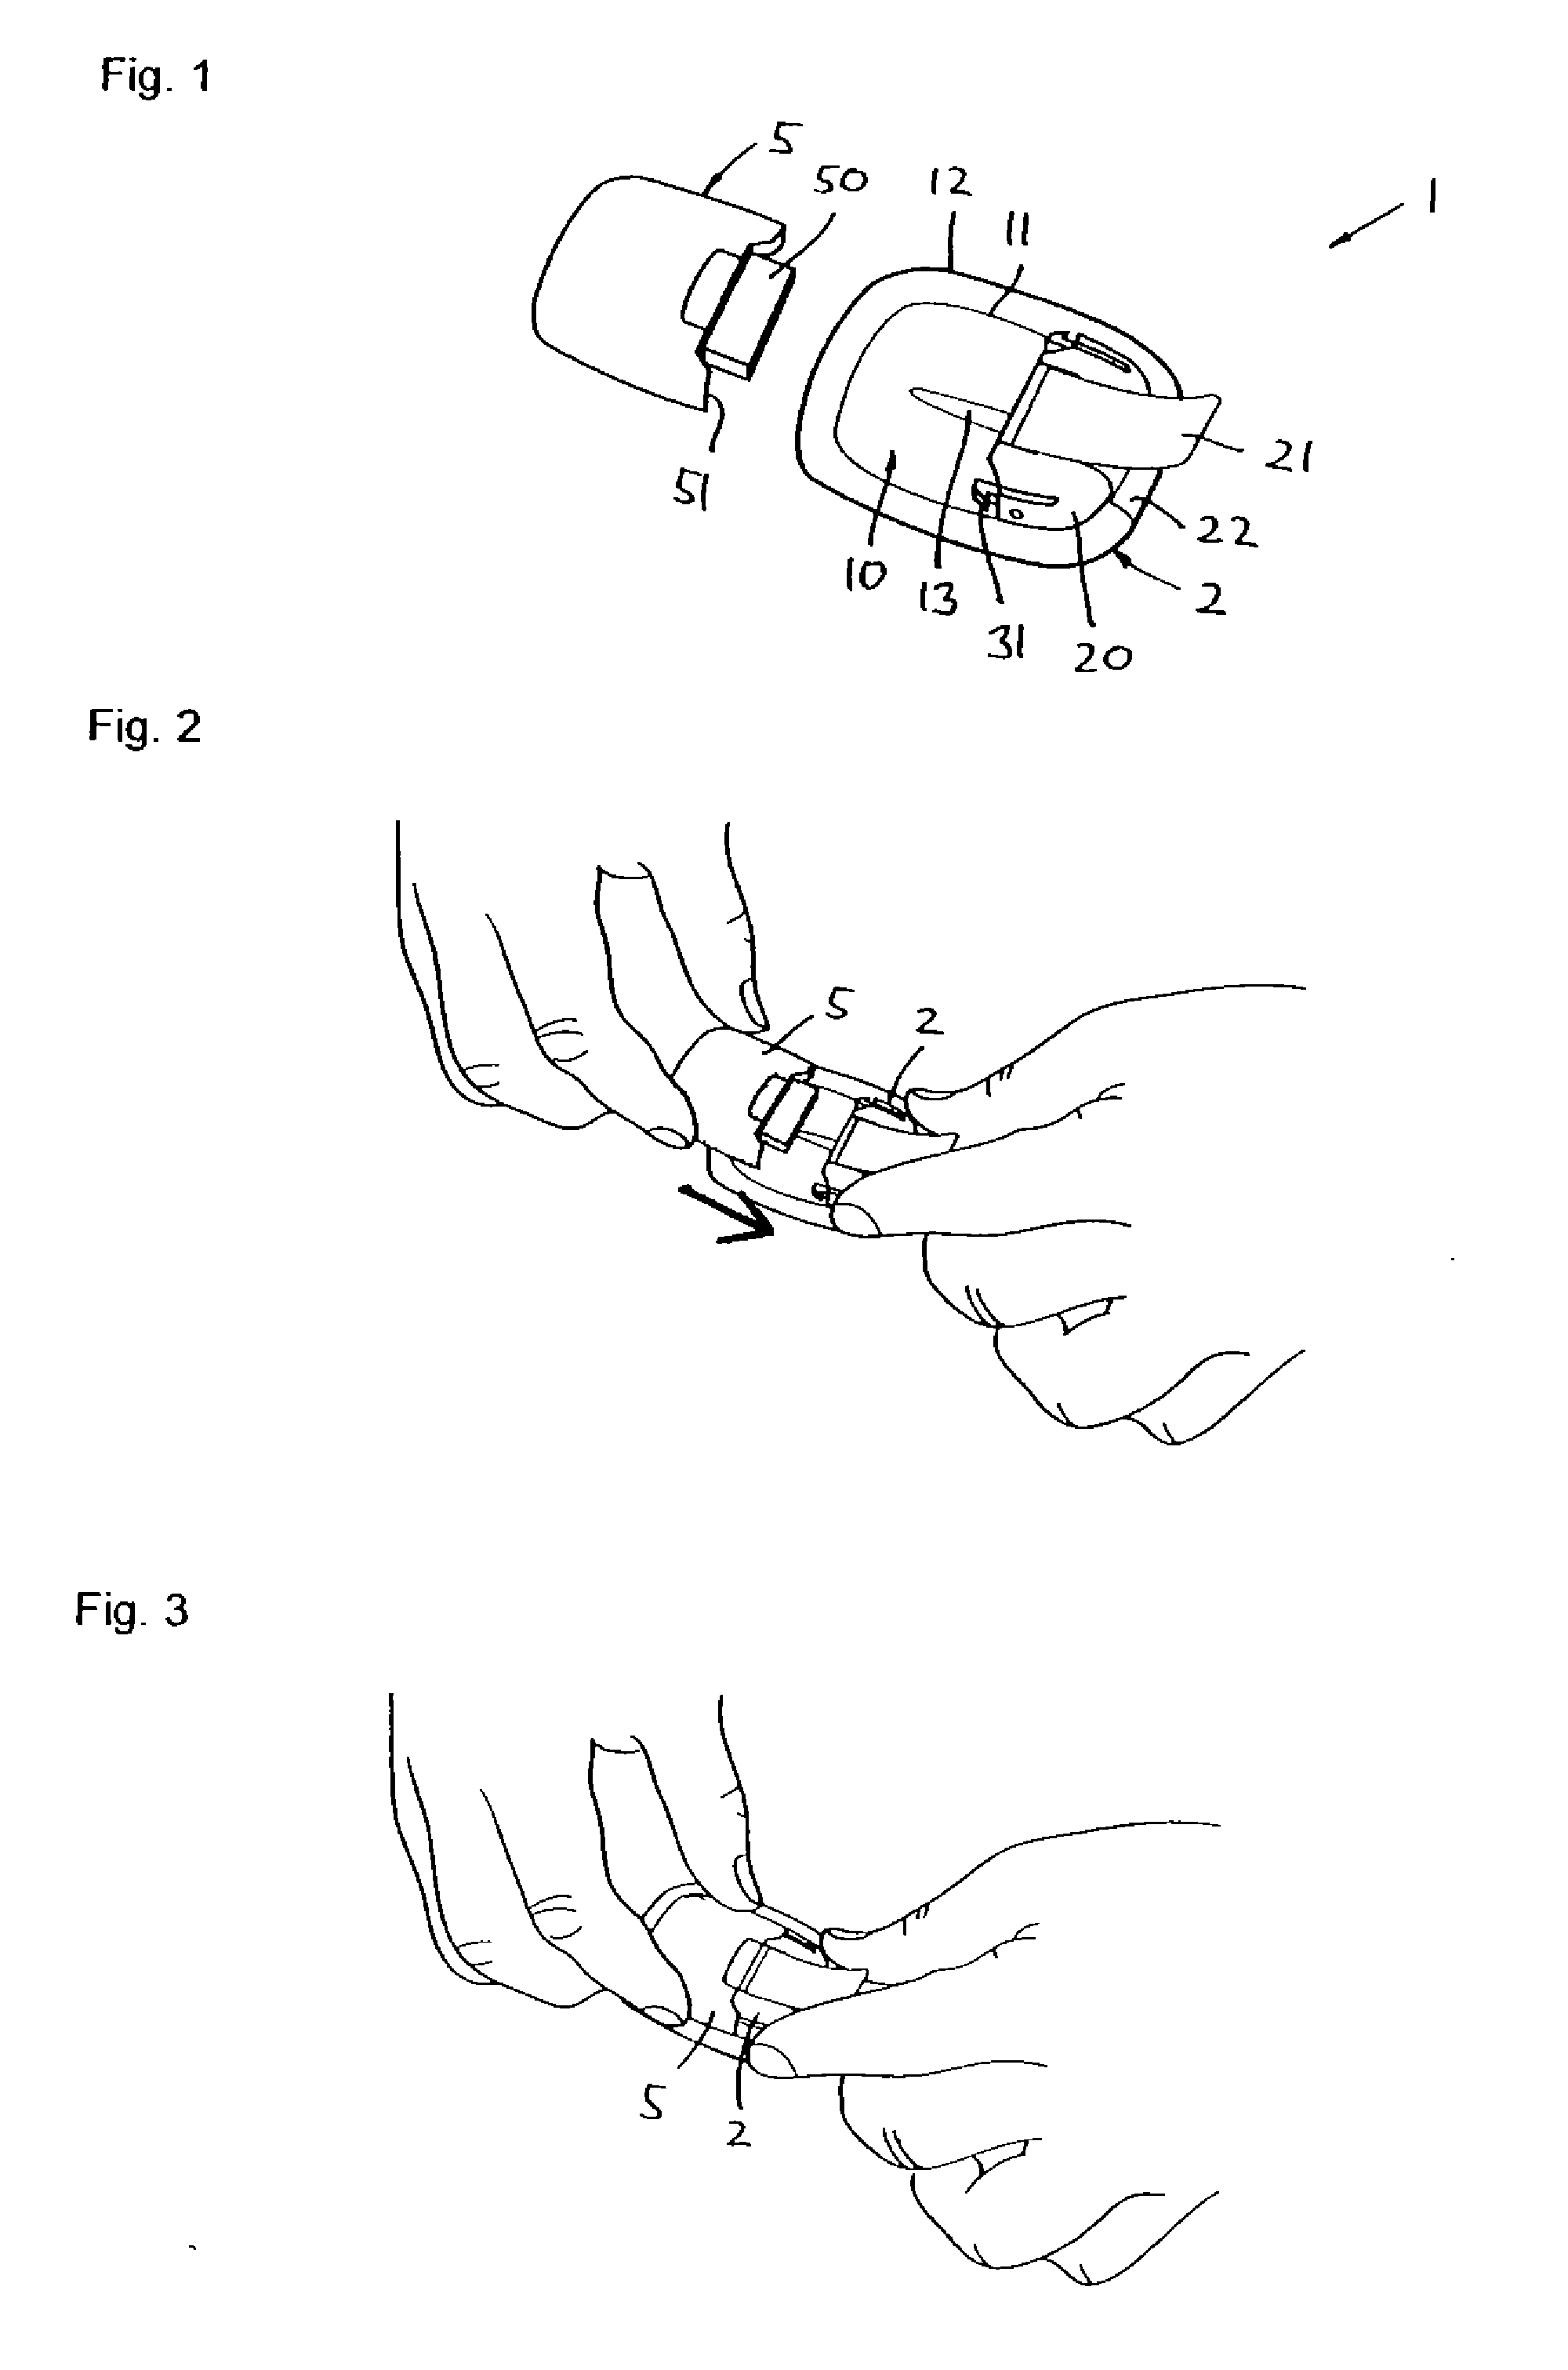 Device for Providing a Change in a Drug Delivery Rate